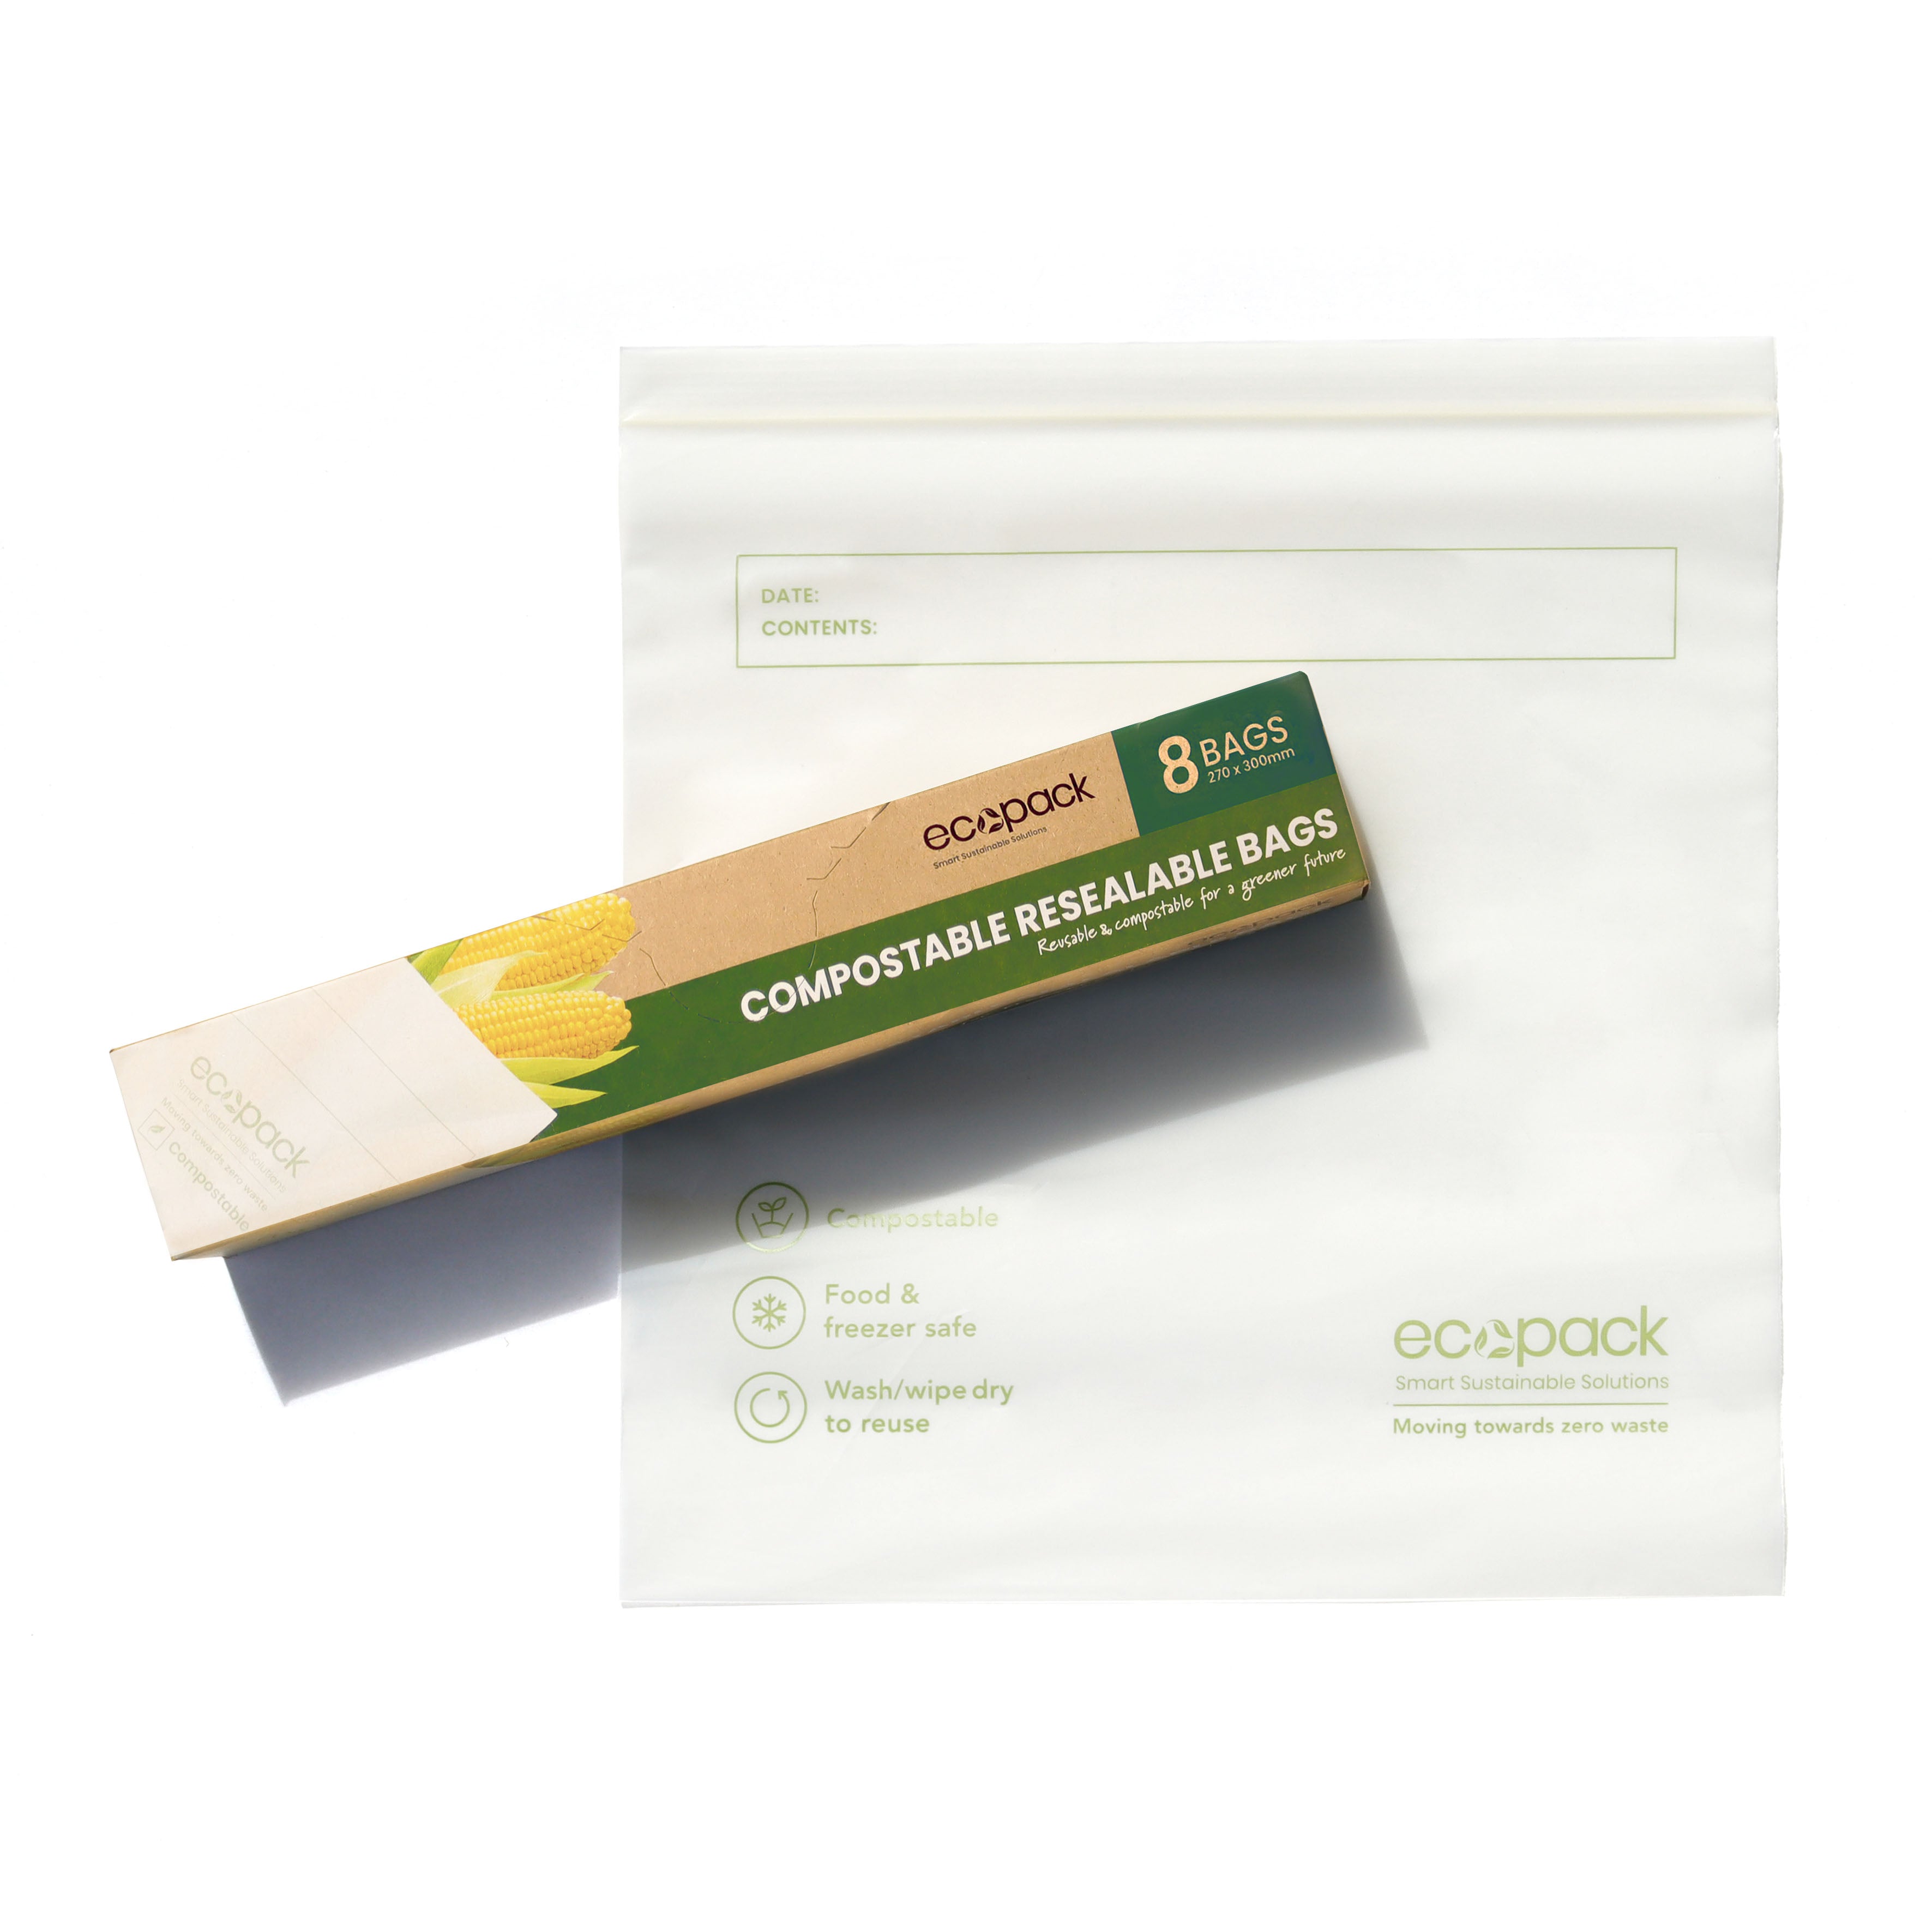 Ecopack Compostable Resealable Storage Bags set ( 3 x 8 ) -24 Bags